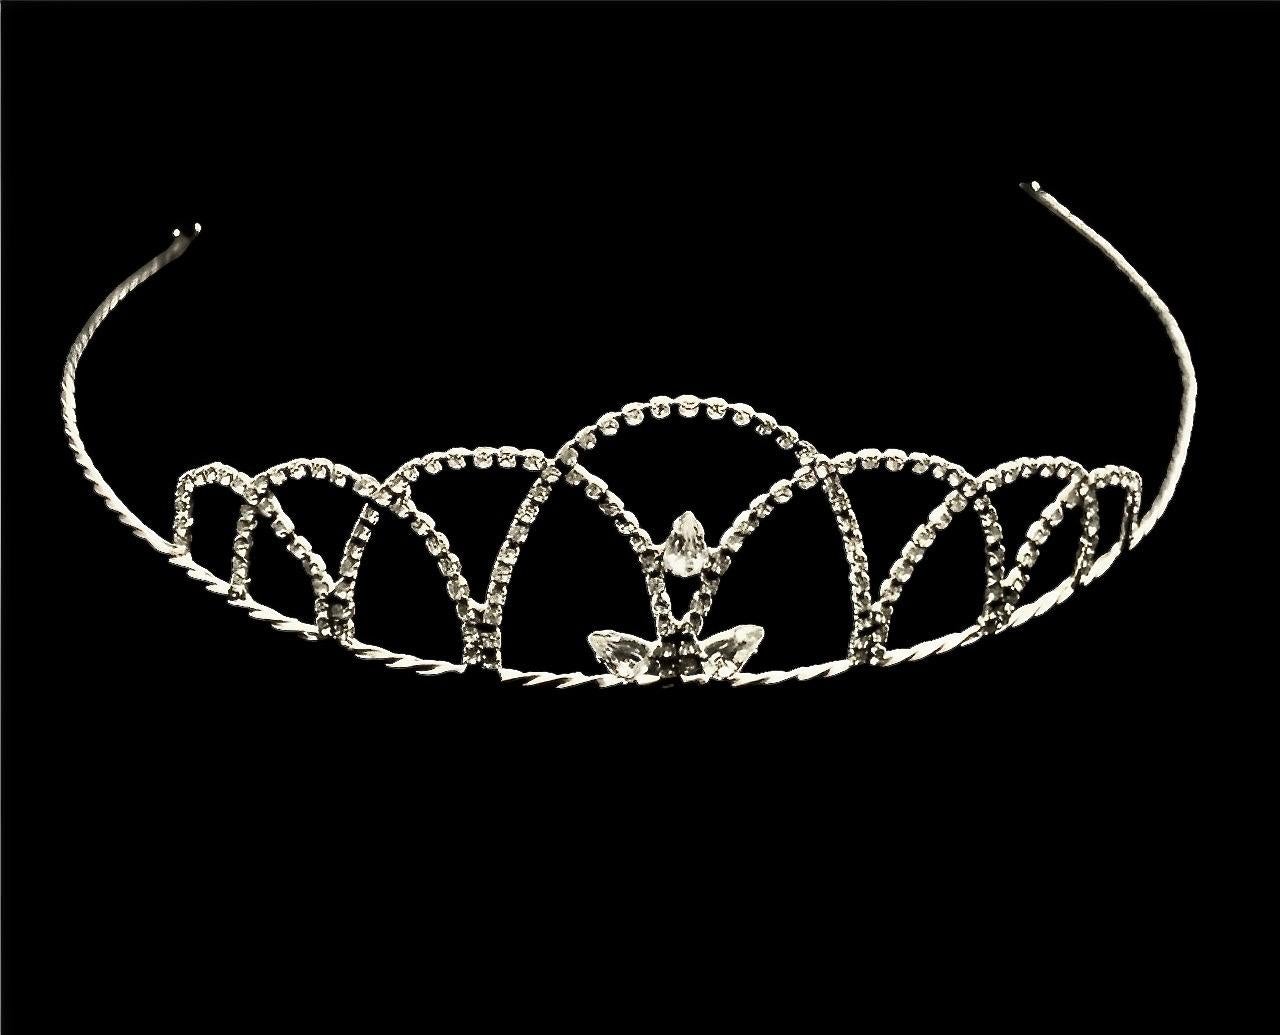 Silver Plated Tiara with a Rope Twist Band and Faceted Rhinestones circa 1960s 2